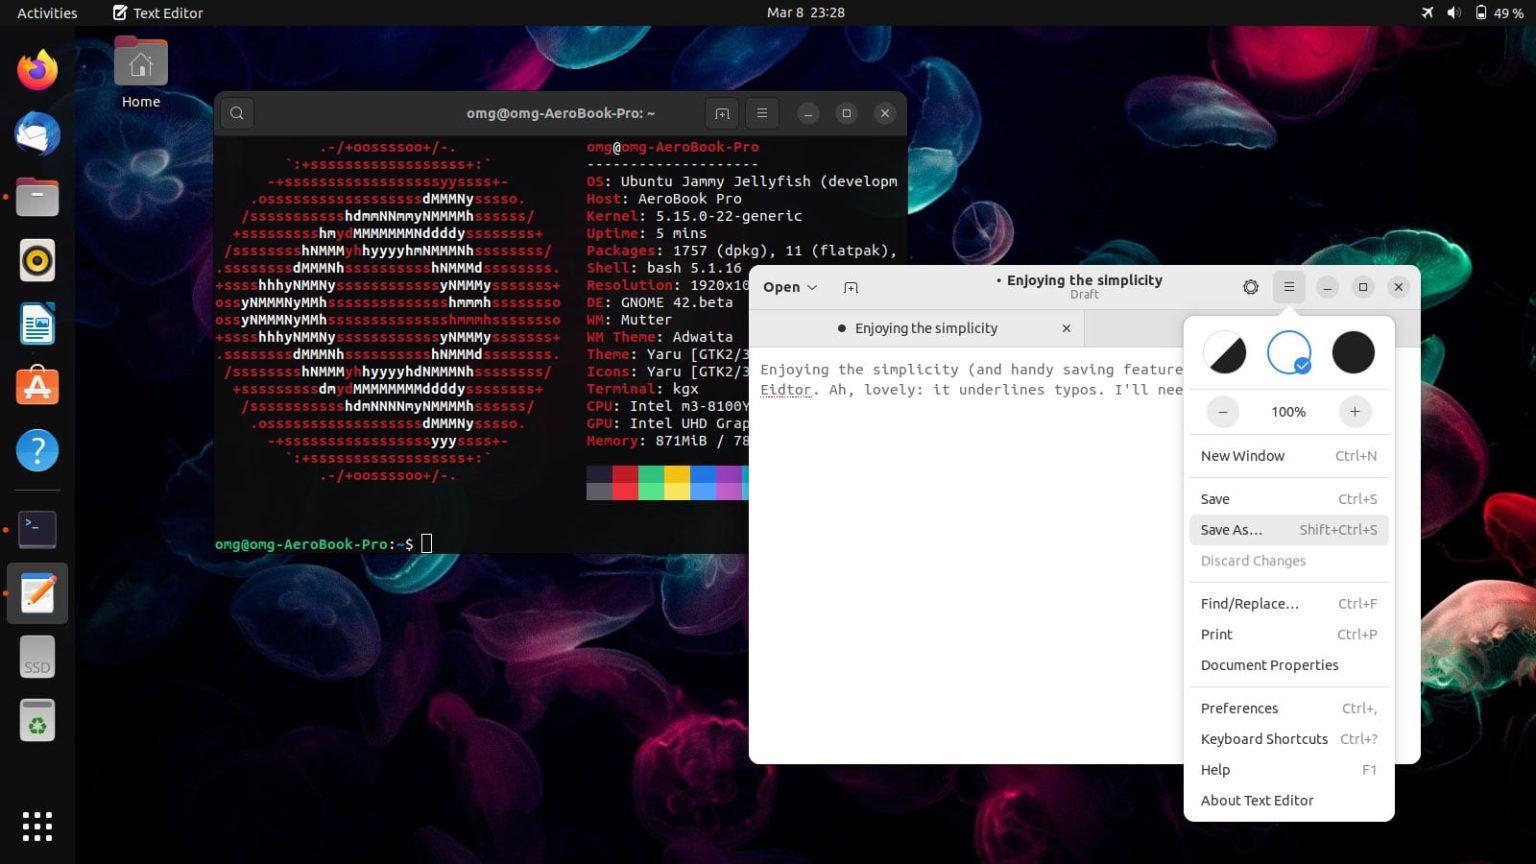 Picture from OMG! Ubuntu! (side by side with the new text editor)